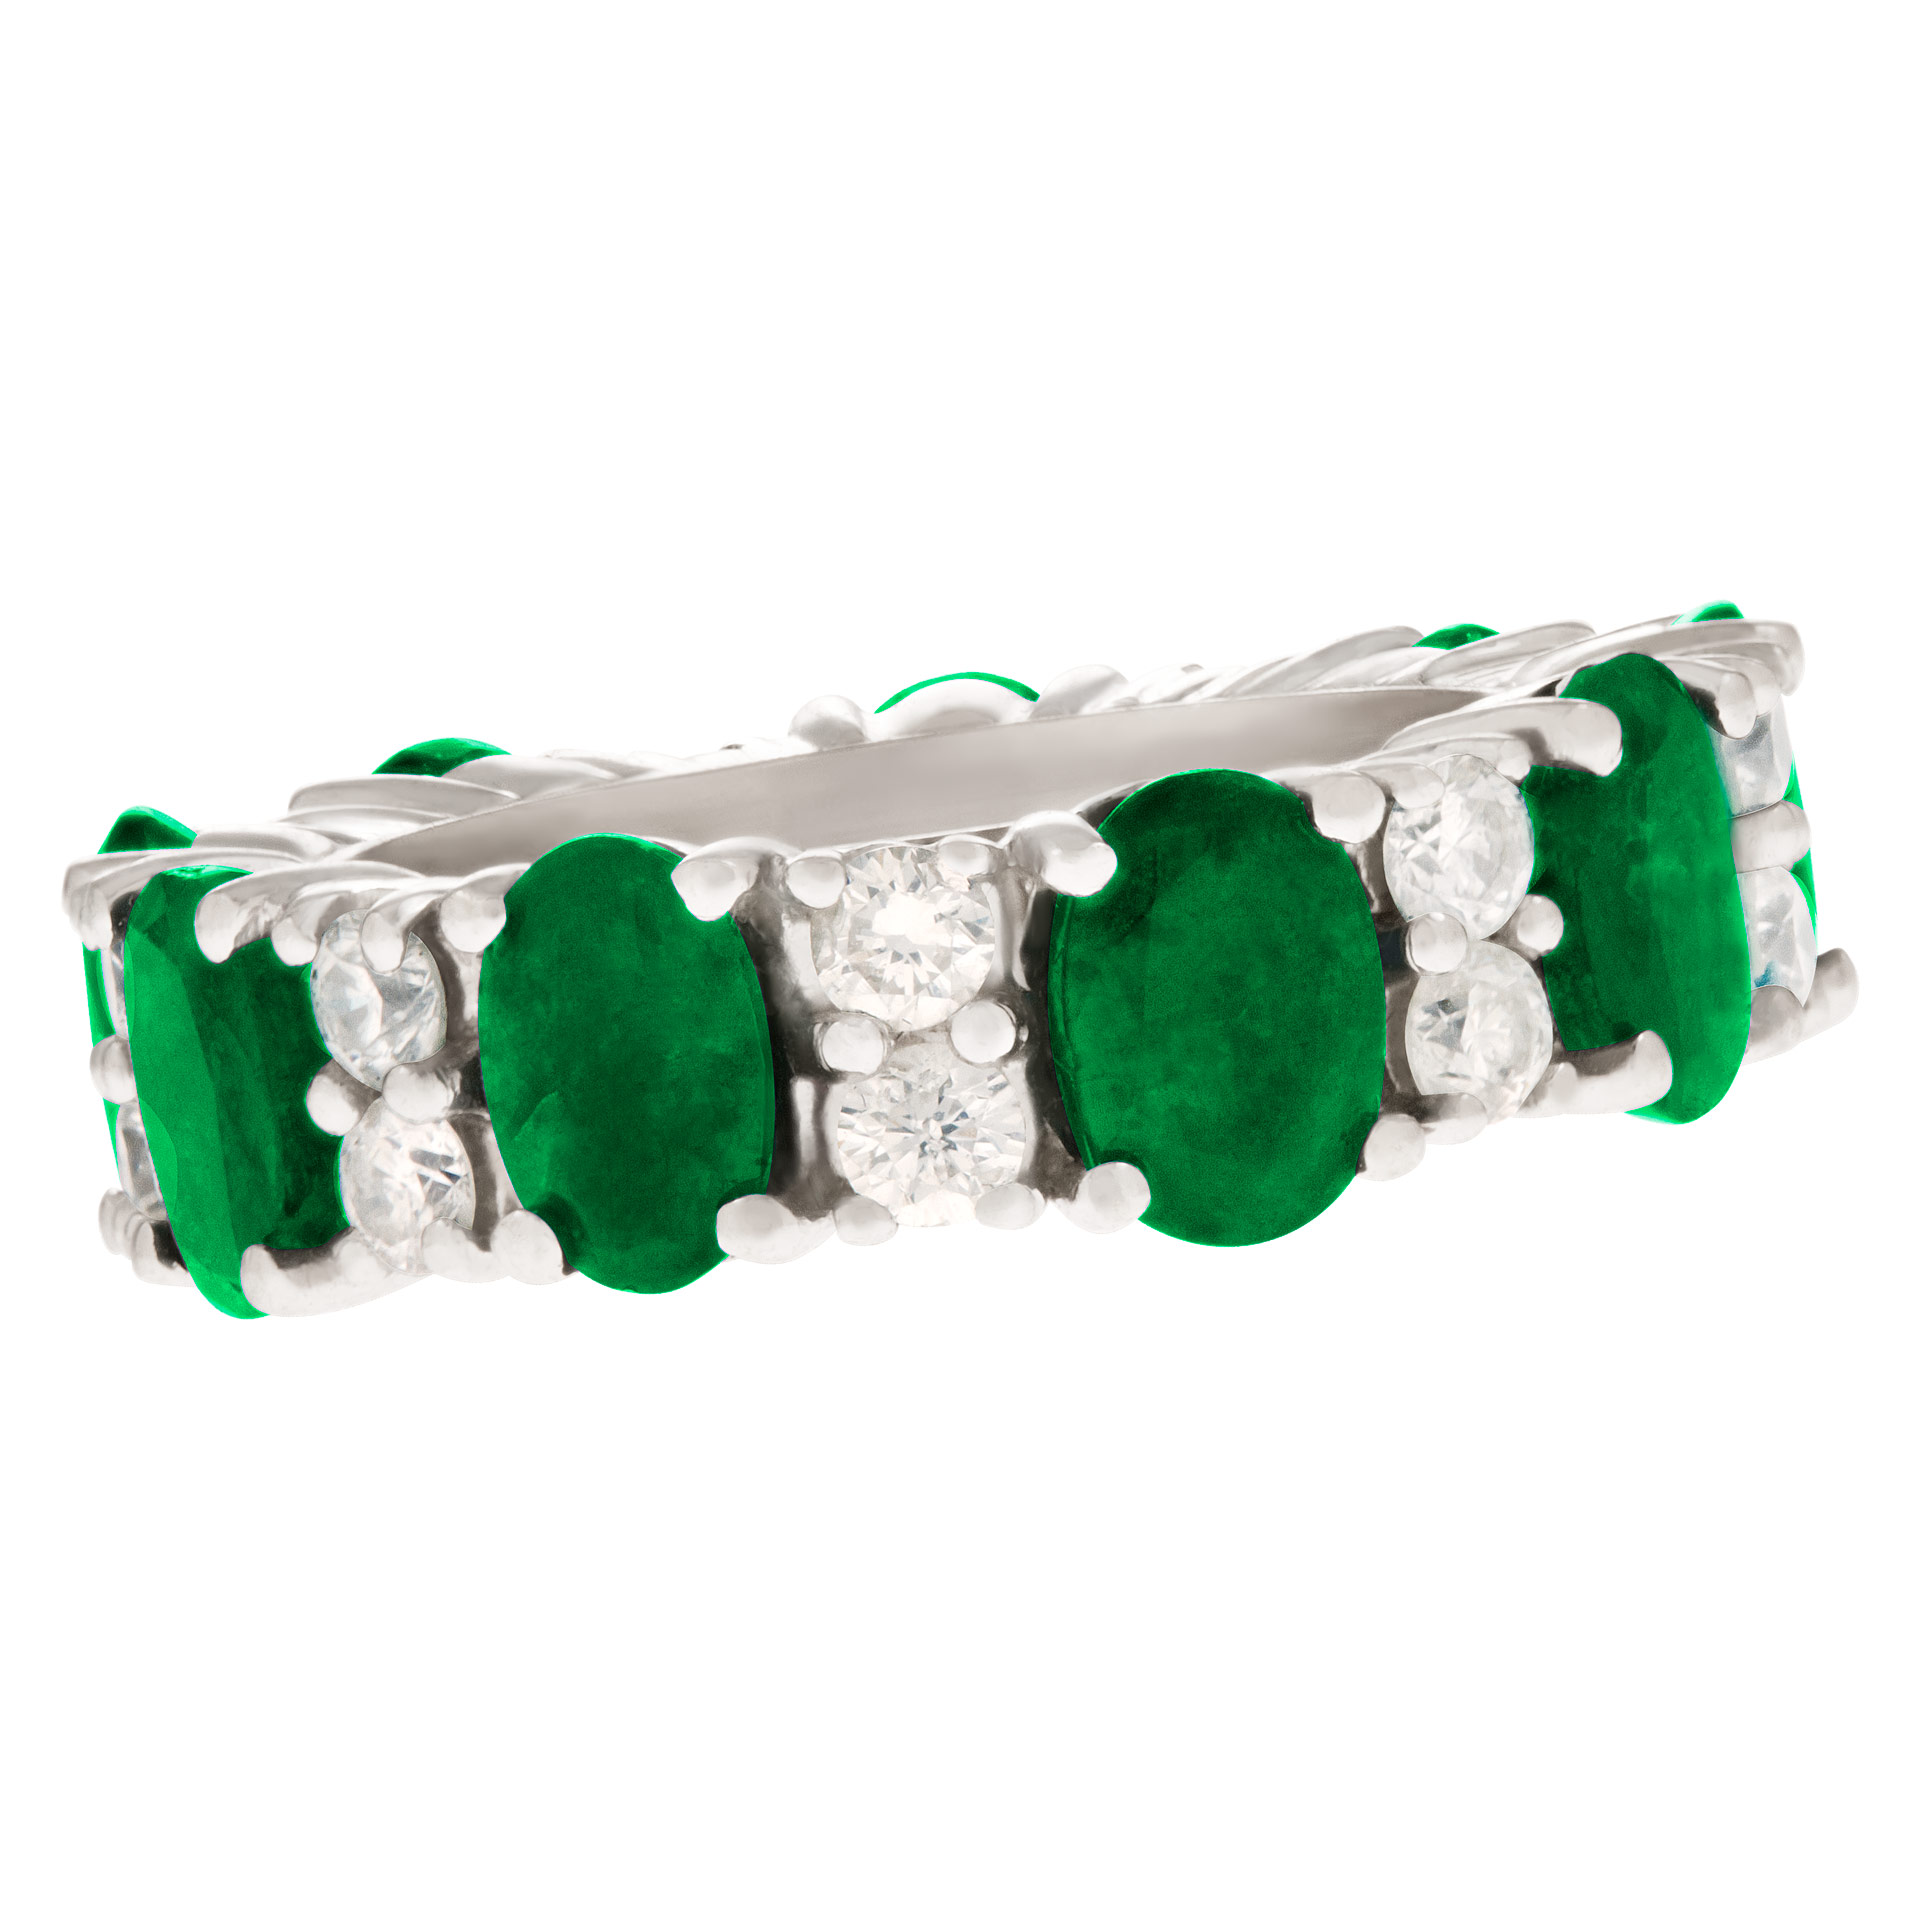 Eternity band in 18k white gold with emeralds & diamonds. Size 4.5 image 1